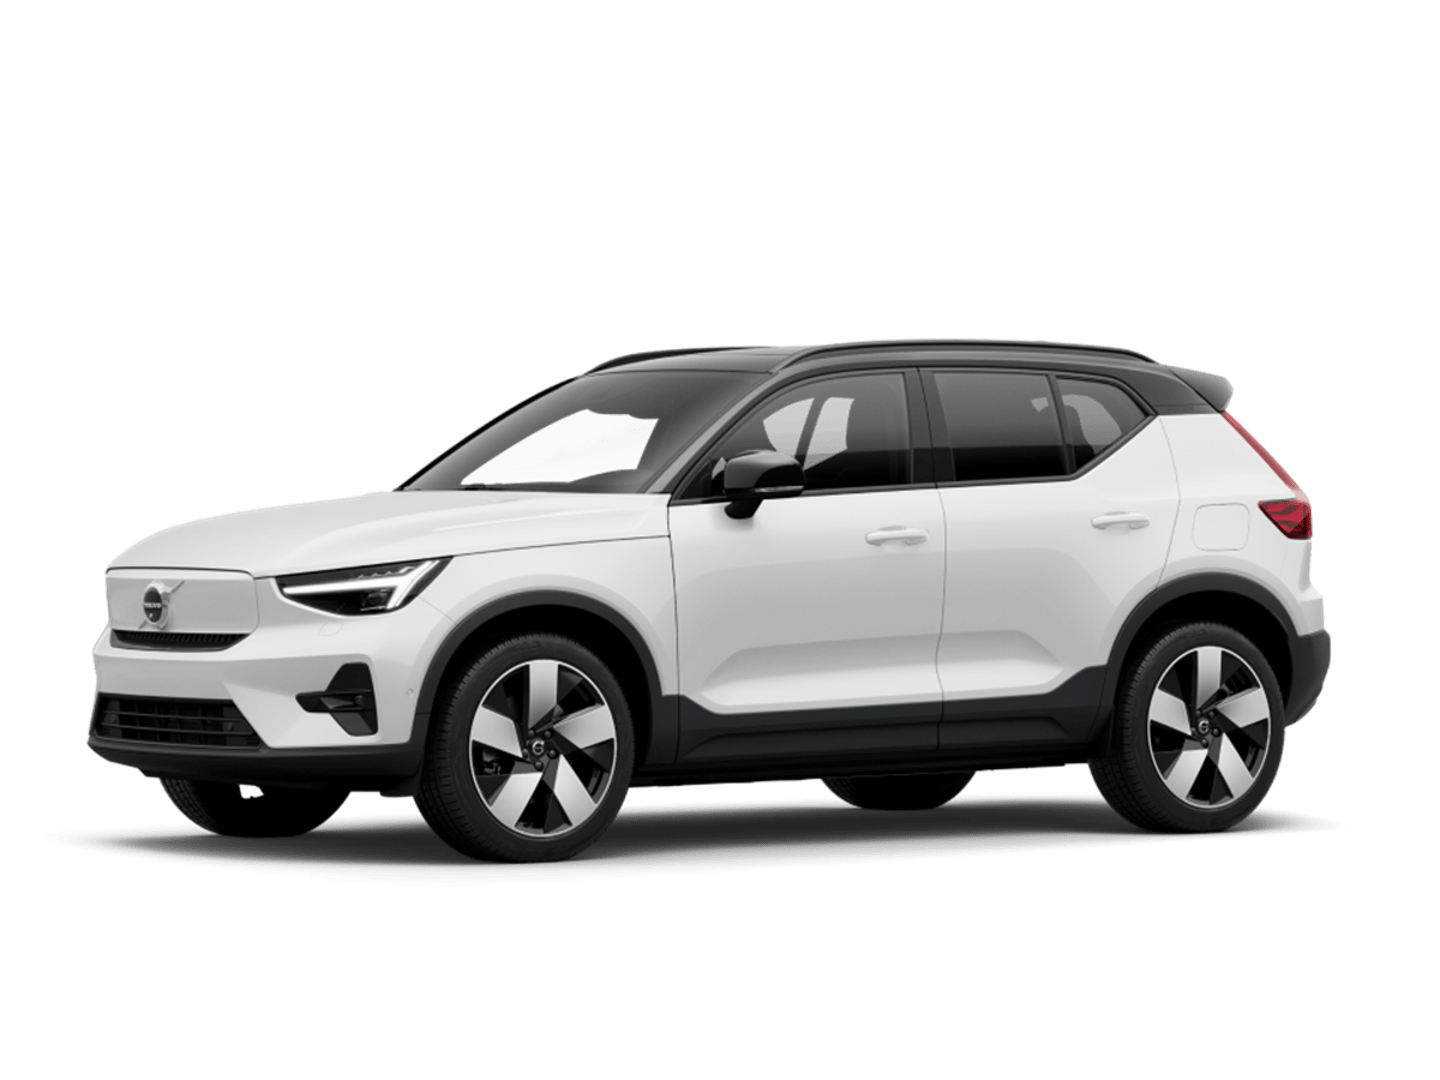 https://carsguide-res.cloudinary.com/image/upload/f_auto,fl_lossy,q_auto,t_default/v1/editorial/vhs/Volvo-XC40-BEV.png